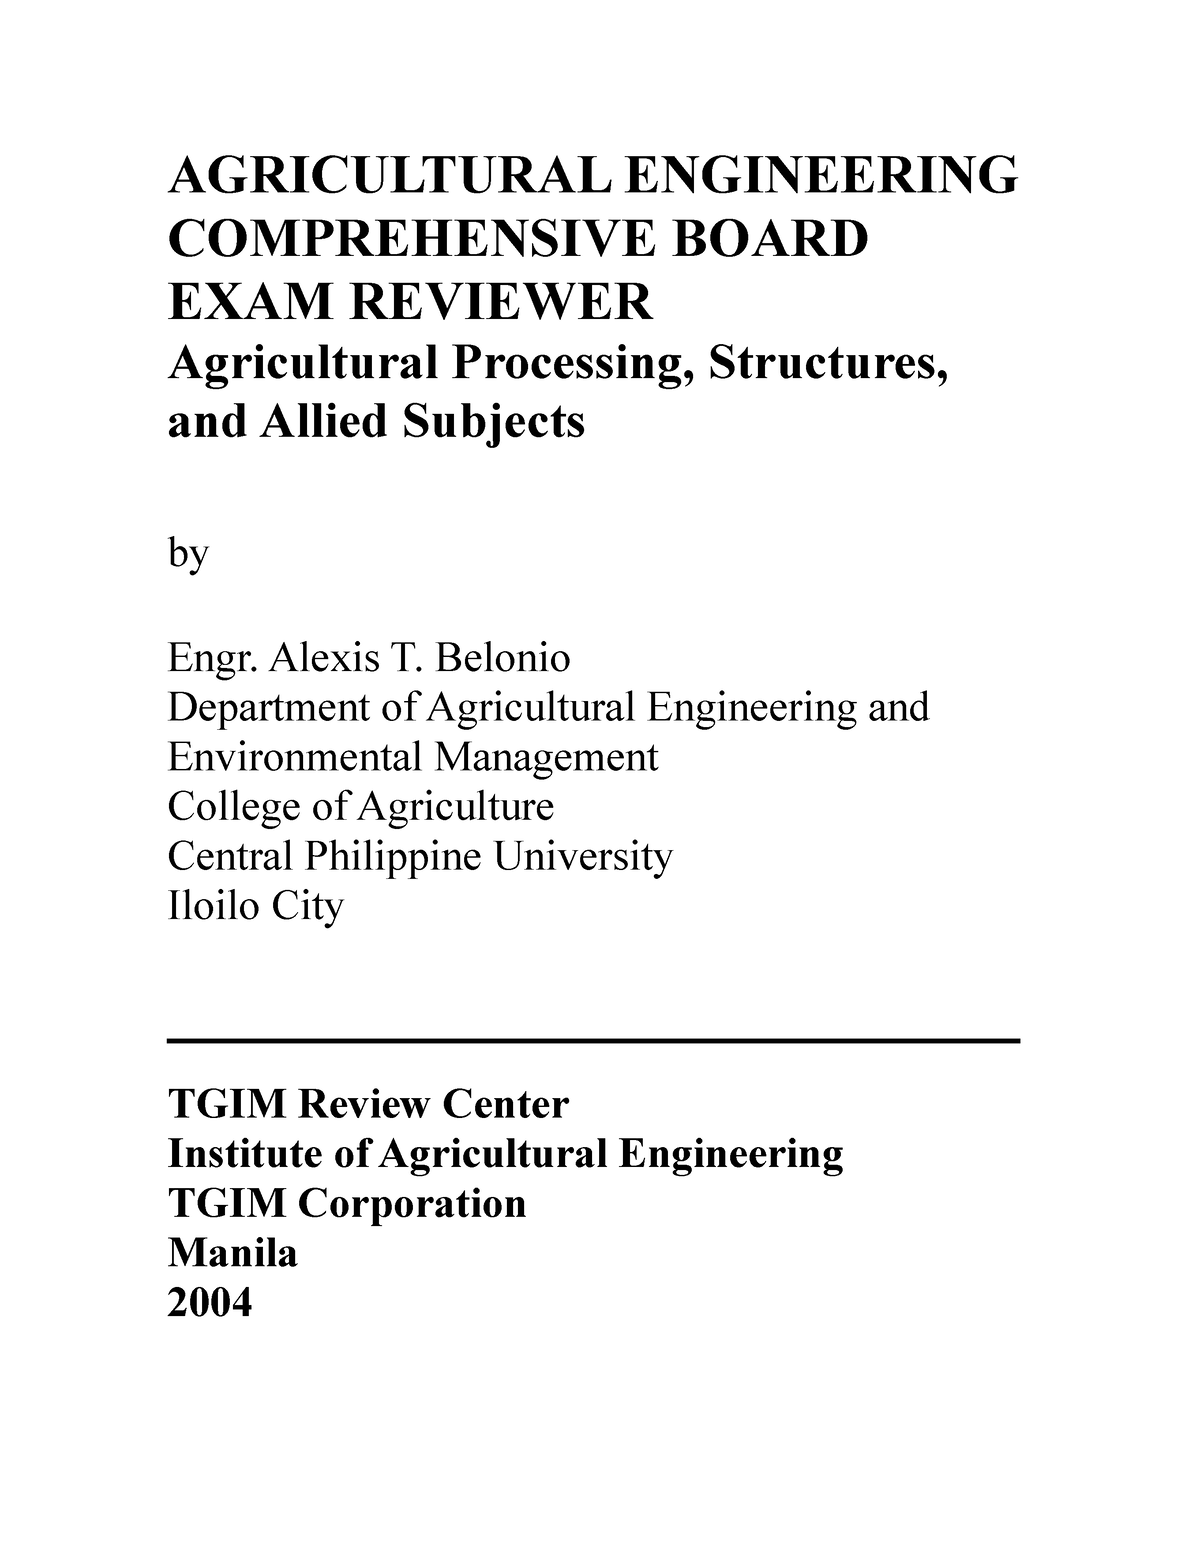 AE Board Exam Reviewer 1 AGRICULTURAL ENGINEERING COMPREHENSIVE BOARD